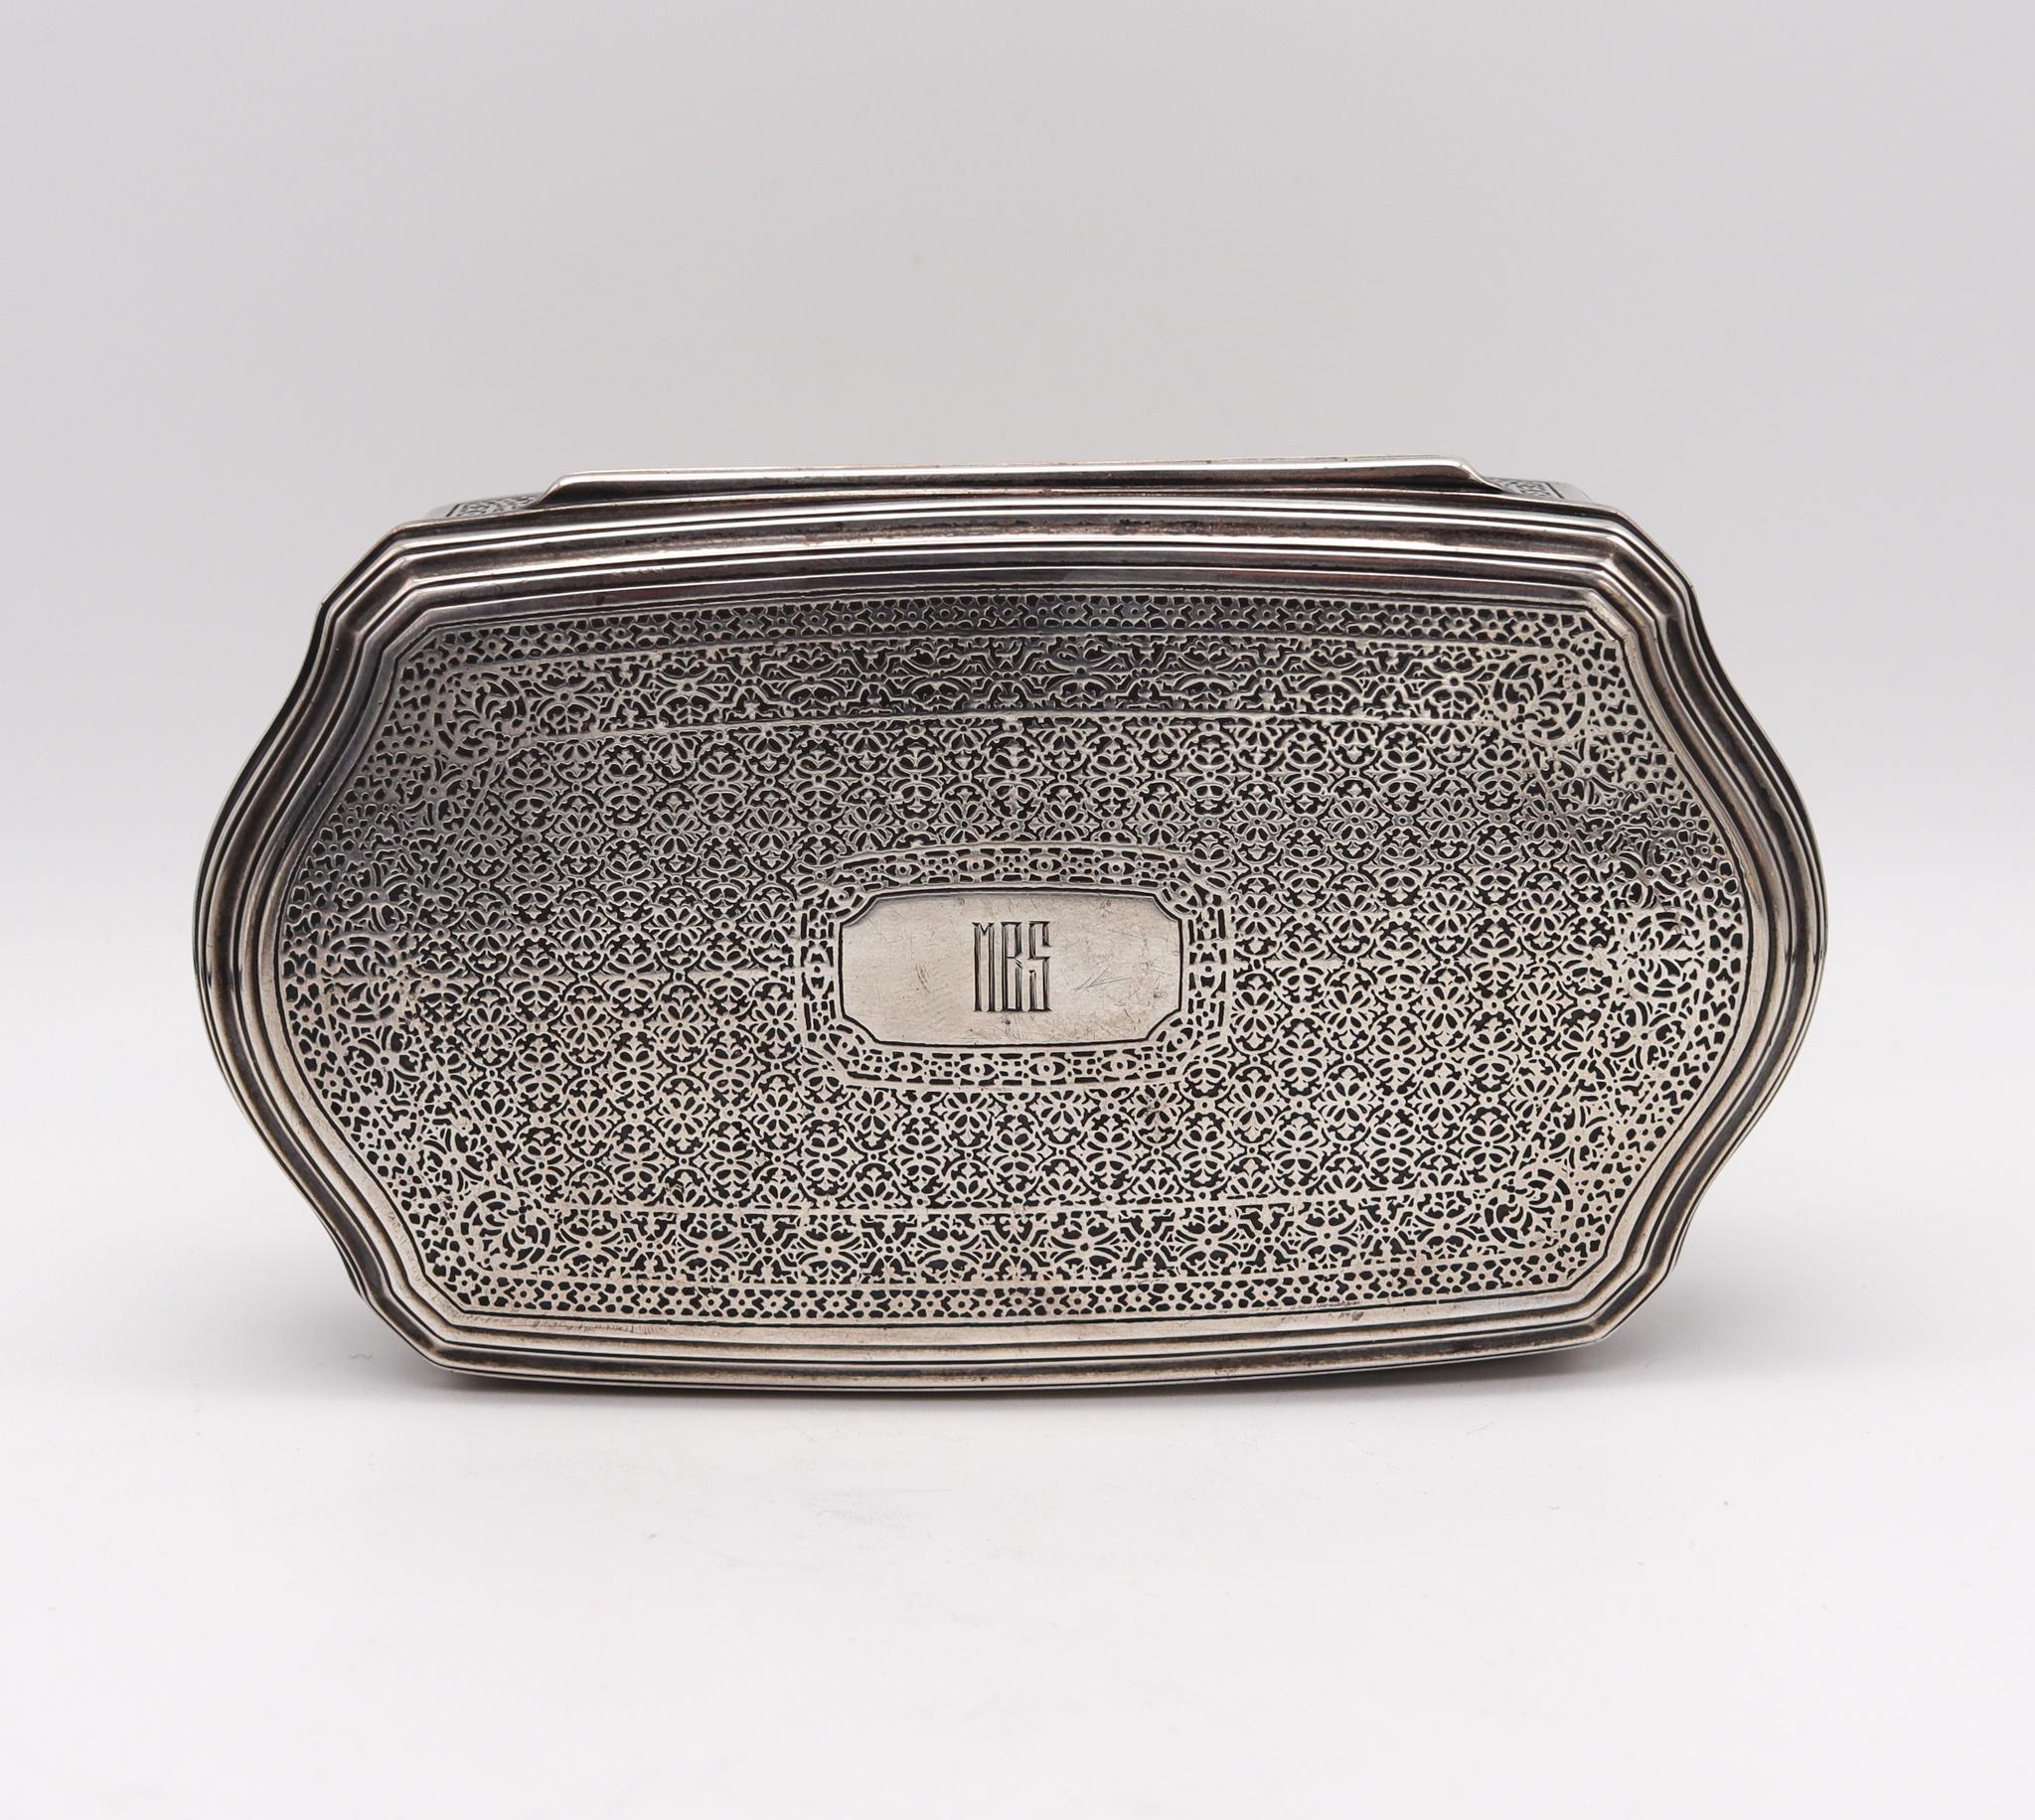 Early 20th Century Tiffany & Co. 1927 Art Deco Chiseled Arabesque Box with Lid .925 Sterling Silver